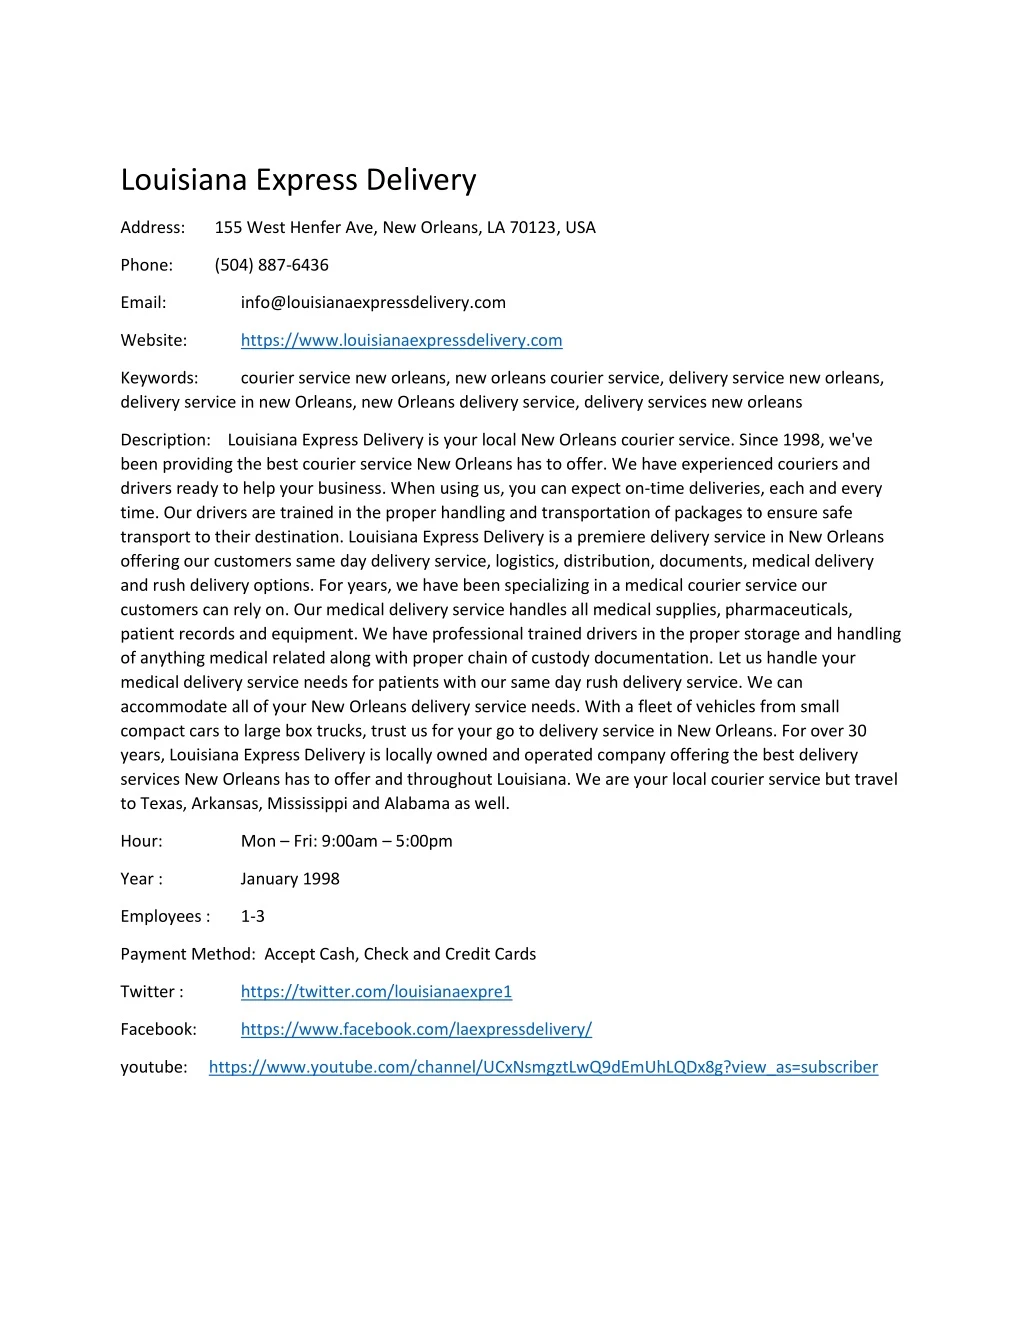 louisiana express delivery n.